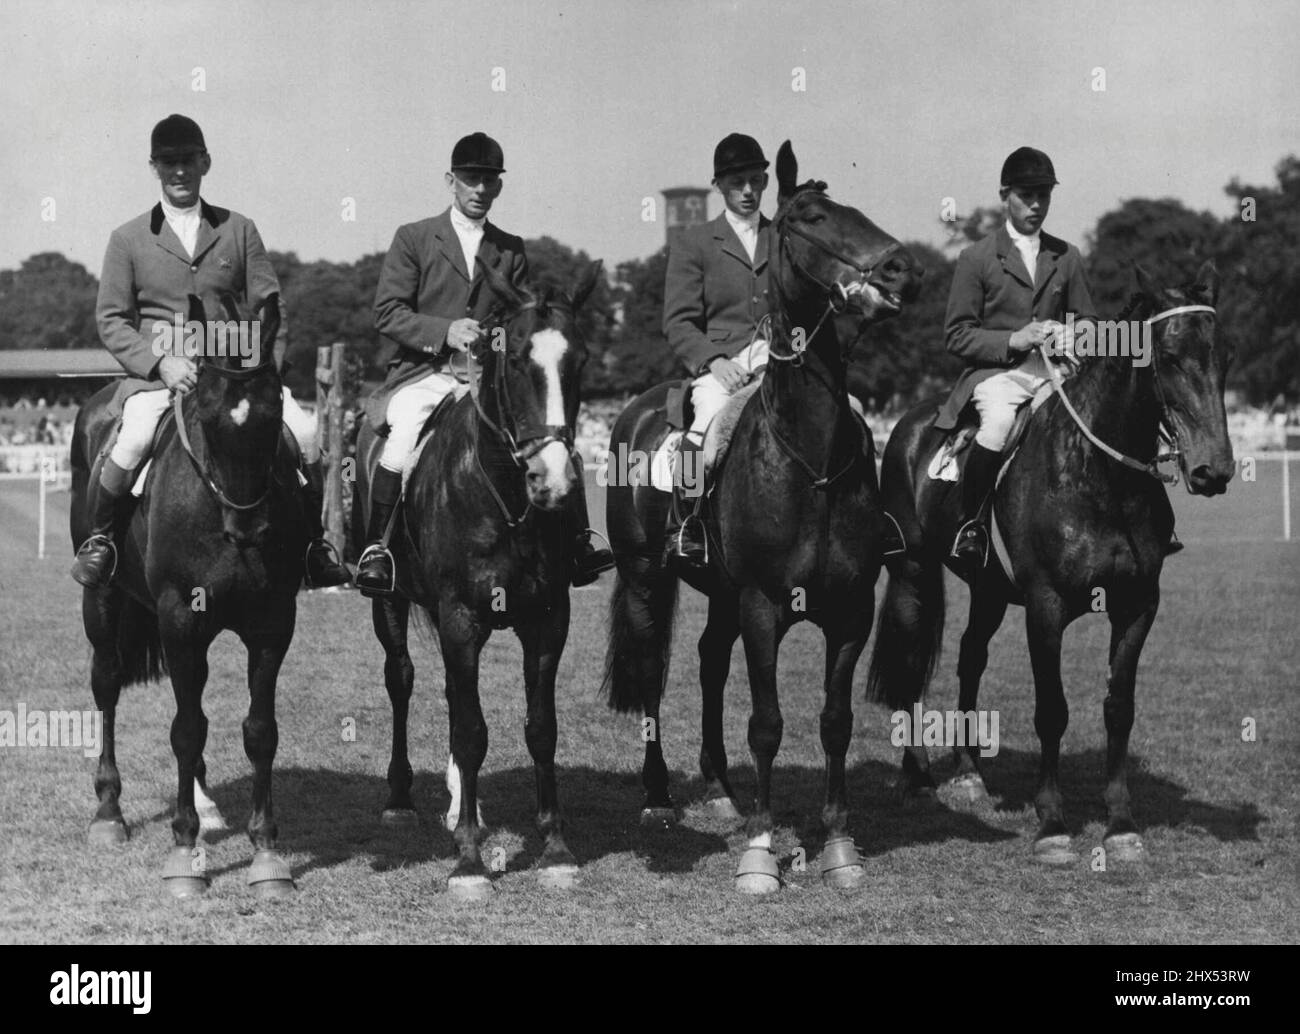 Olympic Riders at Richmond Royal Horse Show - Some of the Olympic Riding team photographed at Old Deer park Richmond today. They are, left to right: Colonel H. Llewellyn on Monarch; W. White on Nizefella; Allan Oliver (Youngest member of the team) on Aherlow; and Peter Robeson on Craven A. More entries than ever before are taking part in the Richmond Royal Horse Show which opened today at Old Deer Park, Highlight of the day was the appearance of members of the Olympic riding team, HM the Queen will attend the show on Saturday. June 12, 1952. (Photo by Fox Photos). Stock Photo